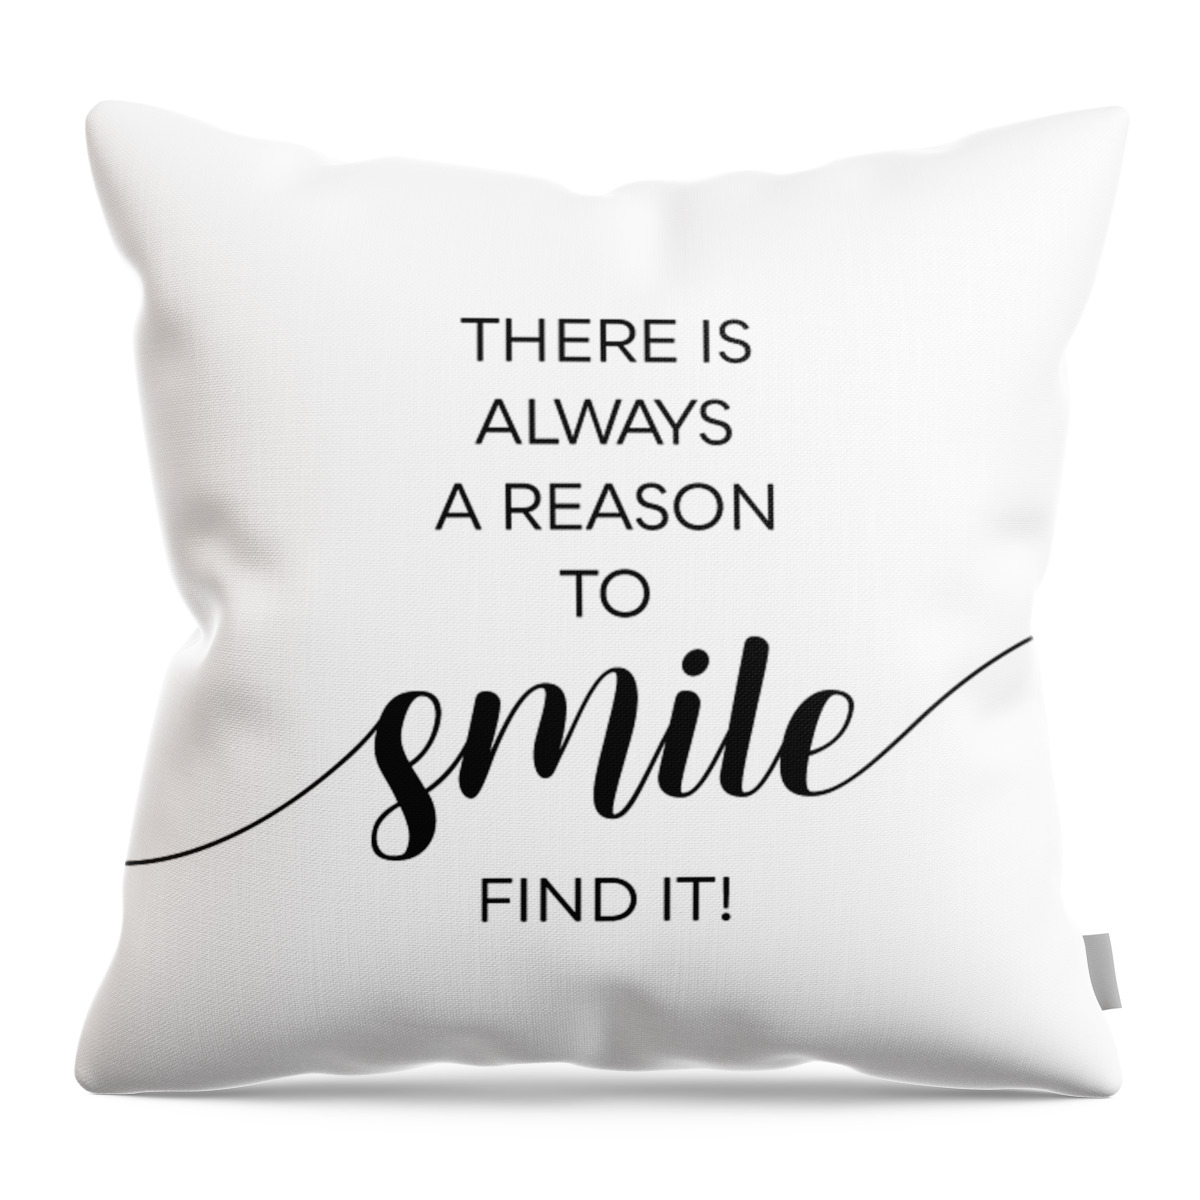 Life Motto Throw Pillow featuring the digital art There Is Always A Reason To Smile by Melanie Viola